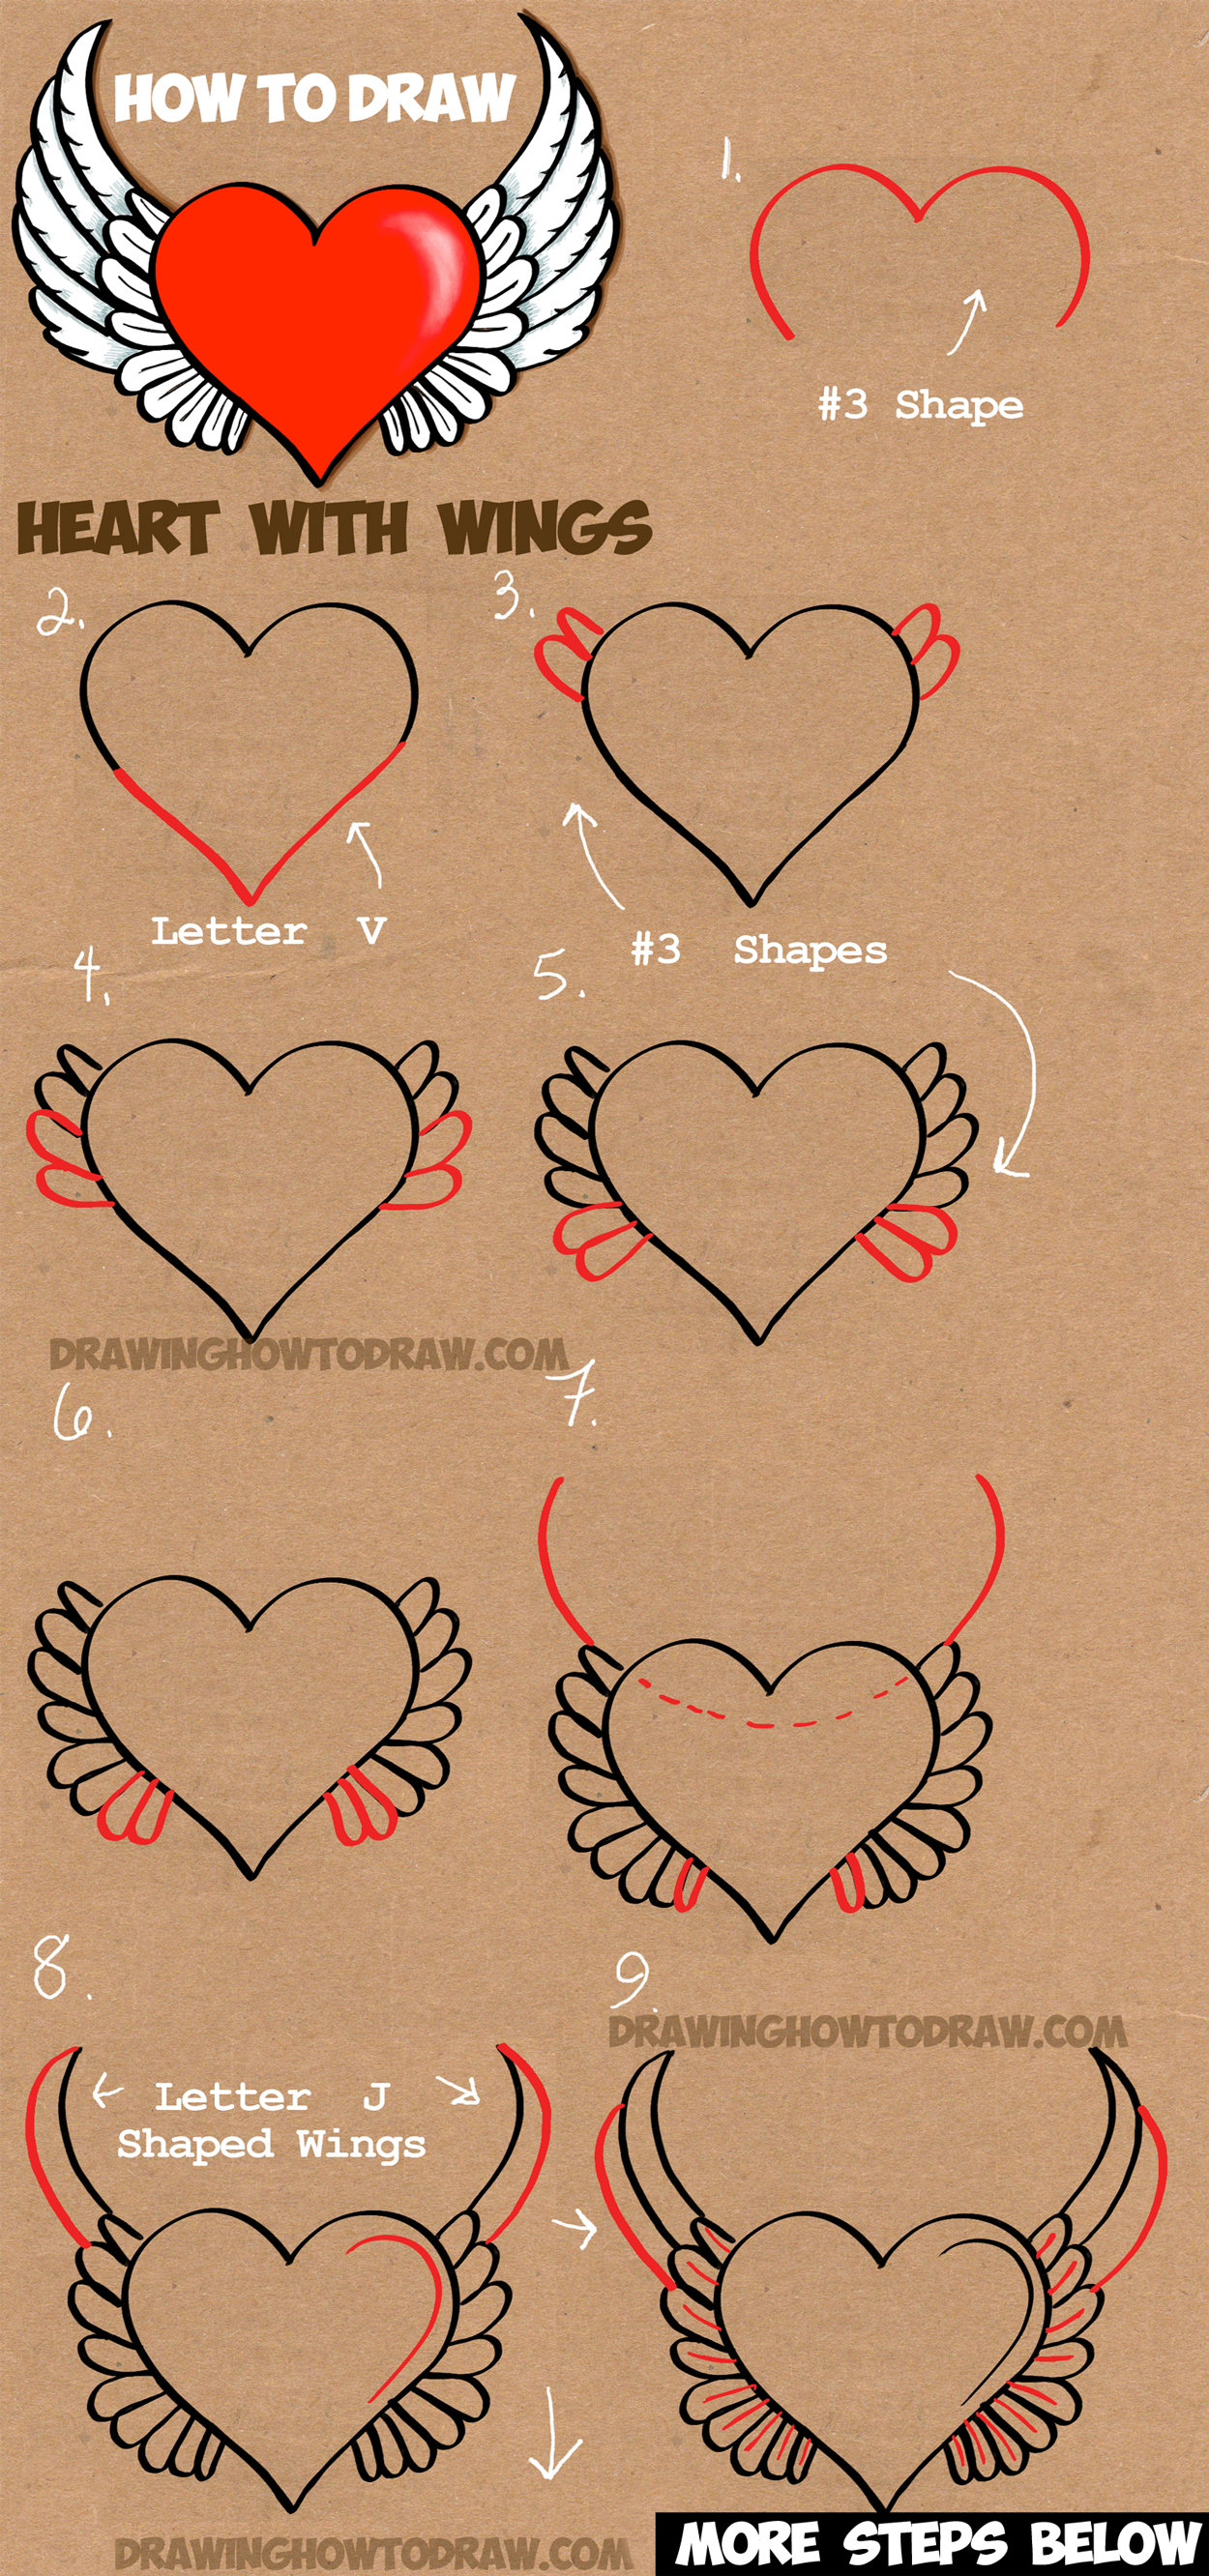 How to Draw a Heart with Wings - Easy Step by Step Drawing ...